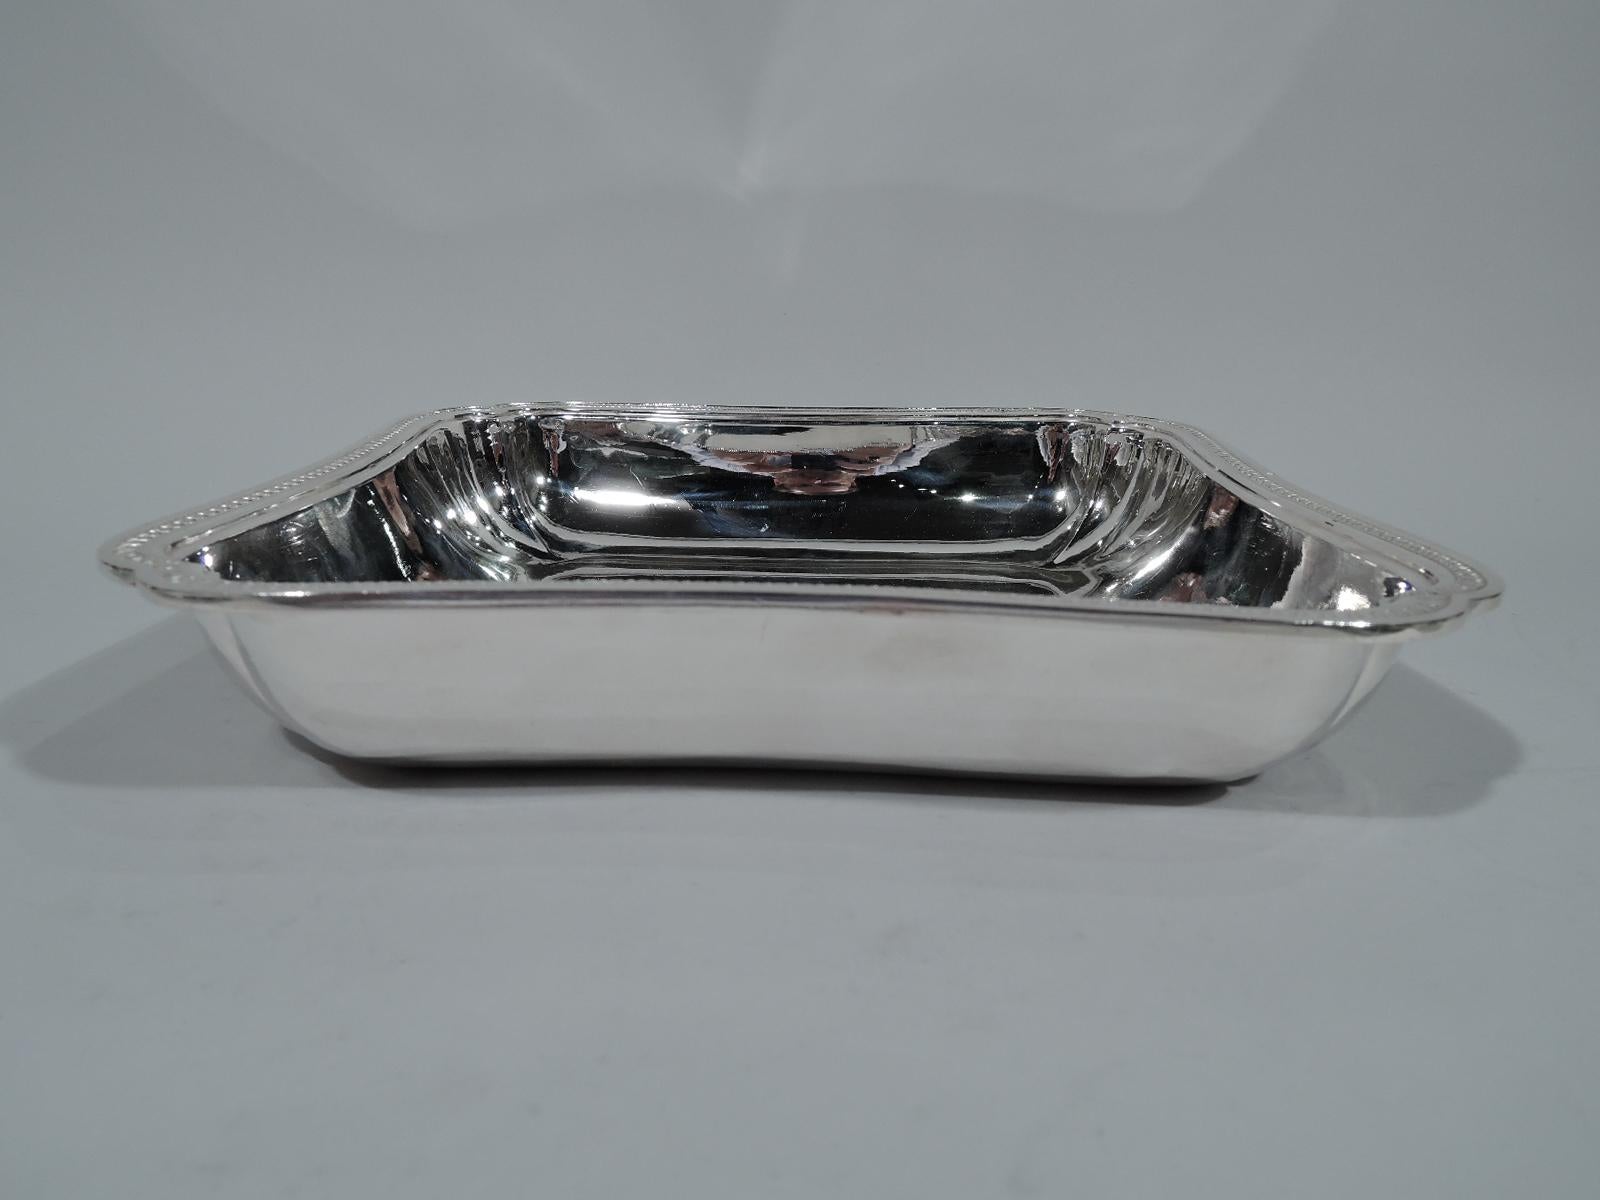 French 950 silver serving bowl, circa 1900. Square with concave sides and lobed corners. Overhanging rim has classical leaf-and-dart border and double-scroll corners. Stylish and restrained. Fully marked with Minerva head and indistinct maker’s